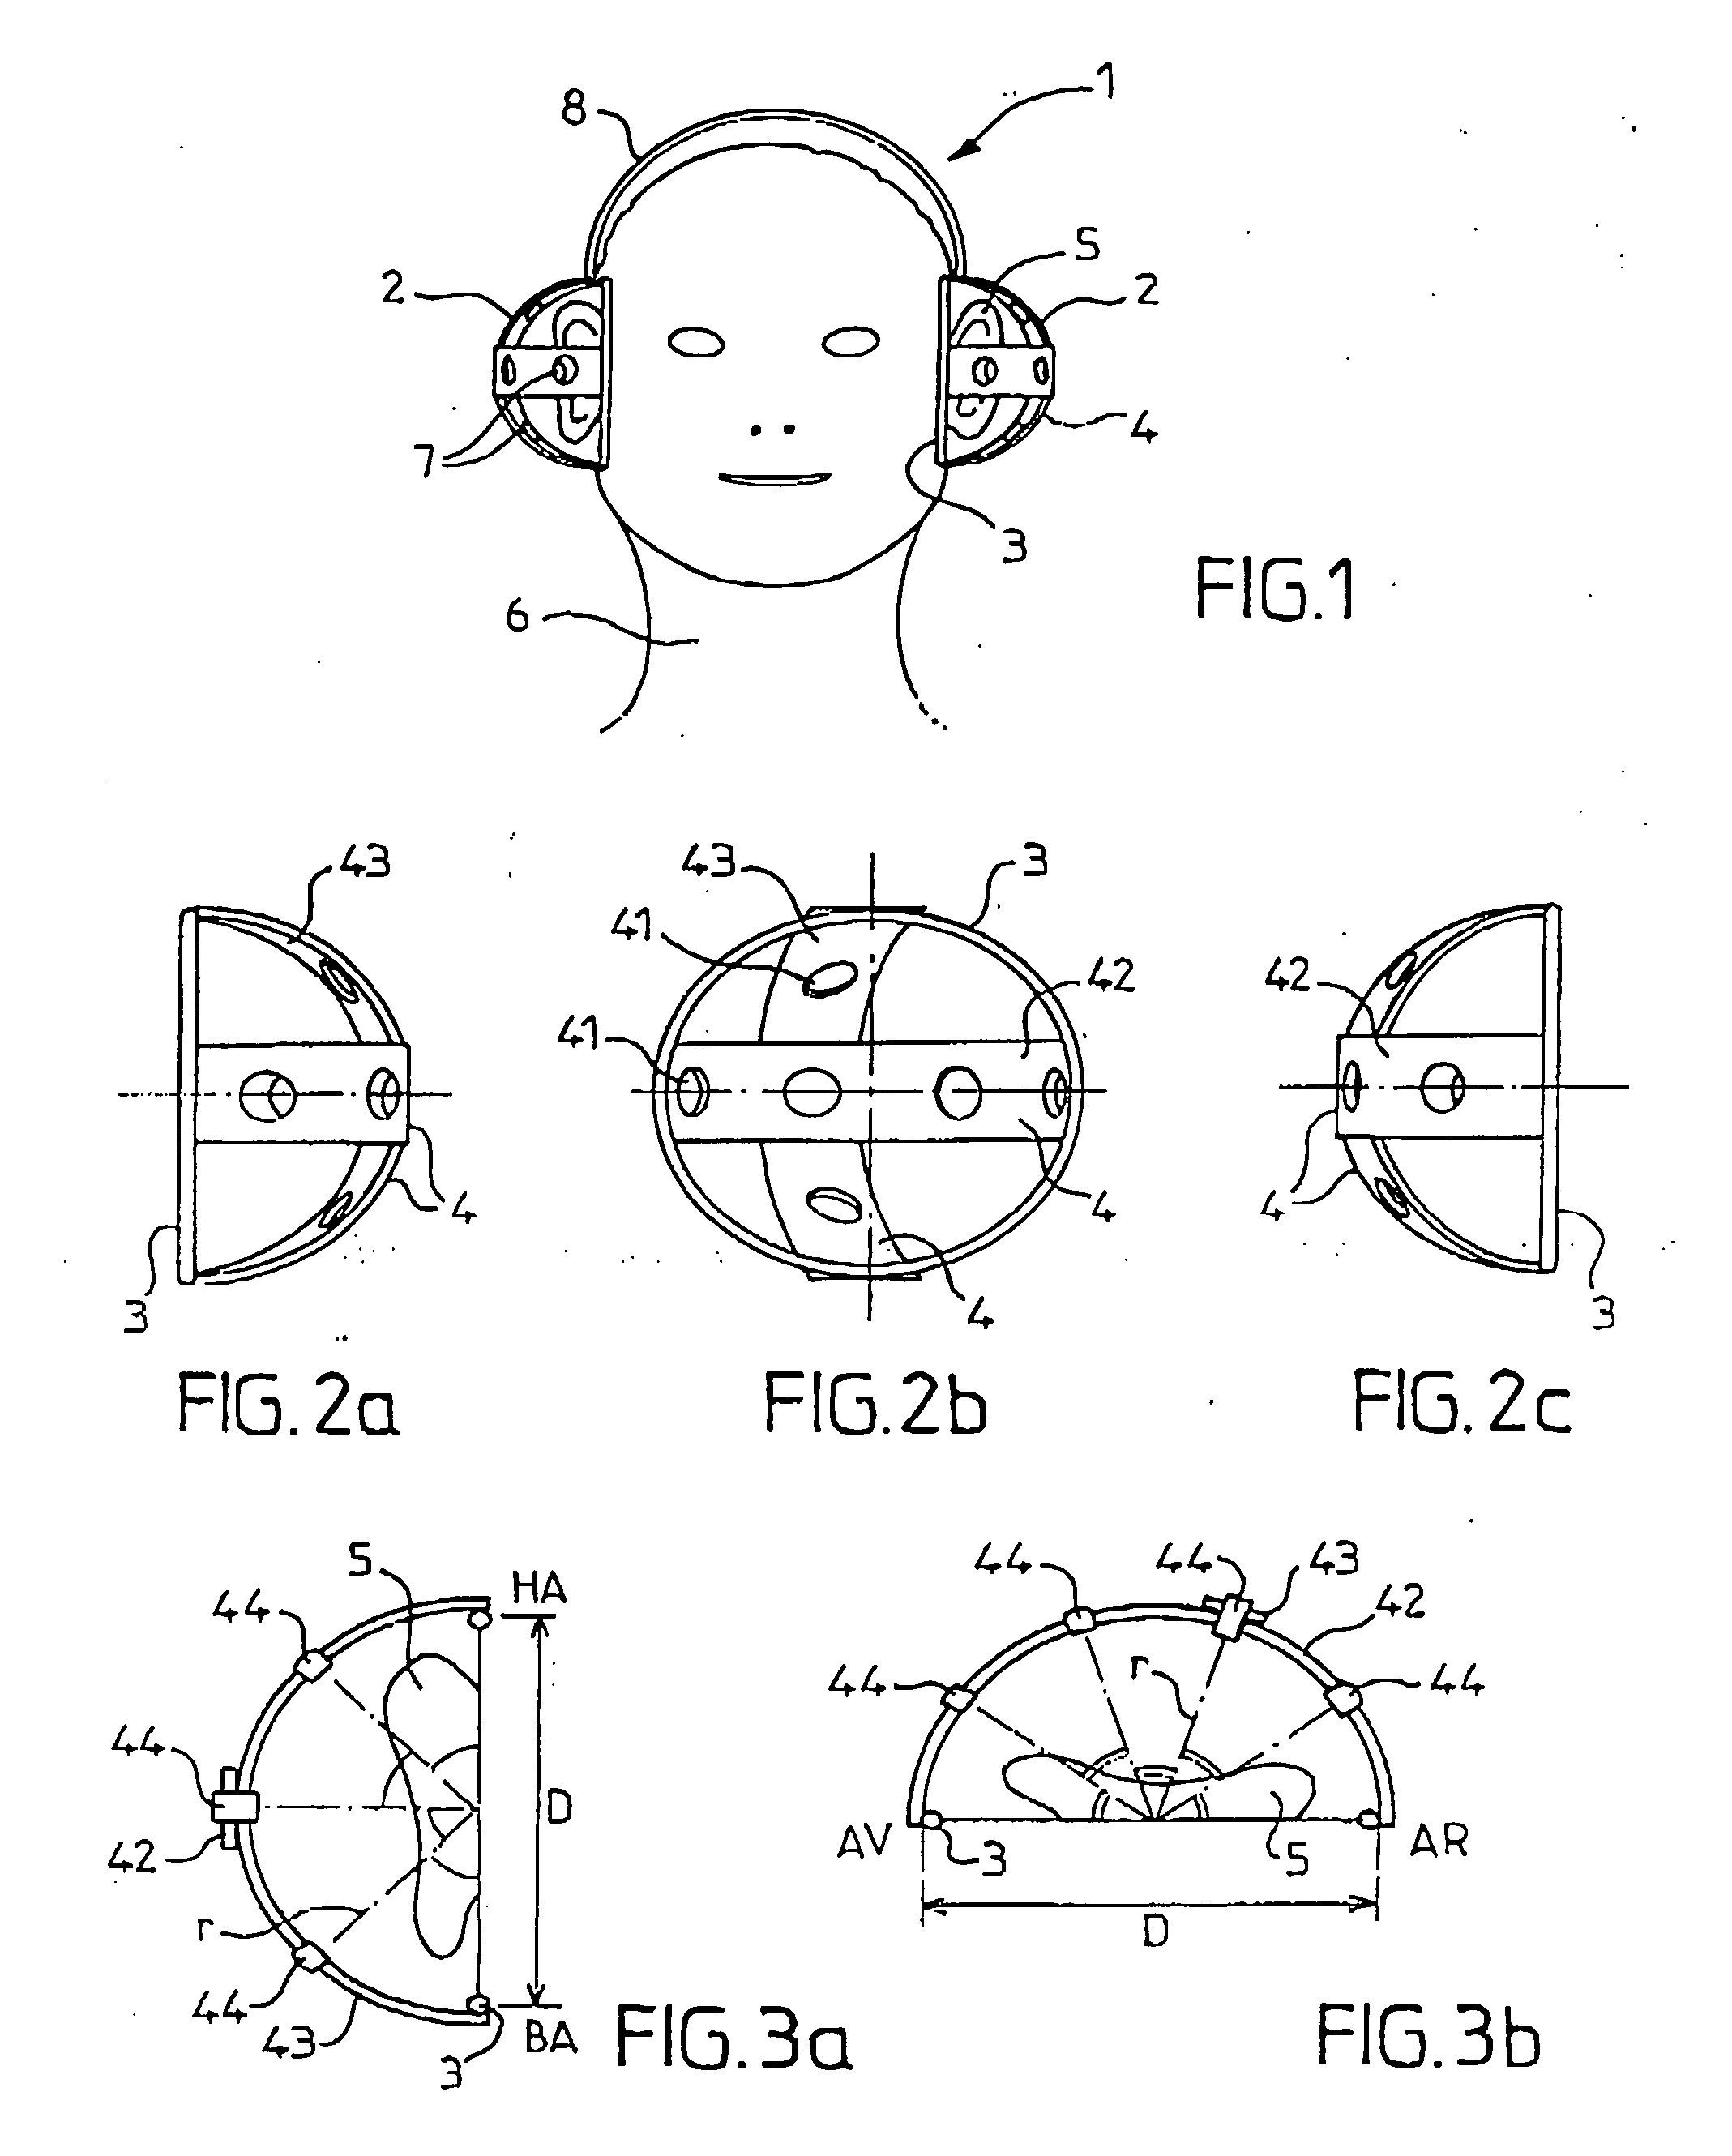 Headphone for spatial sound reproduction